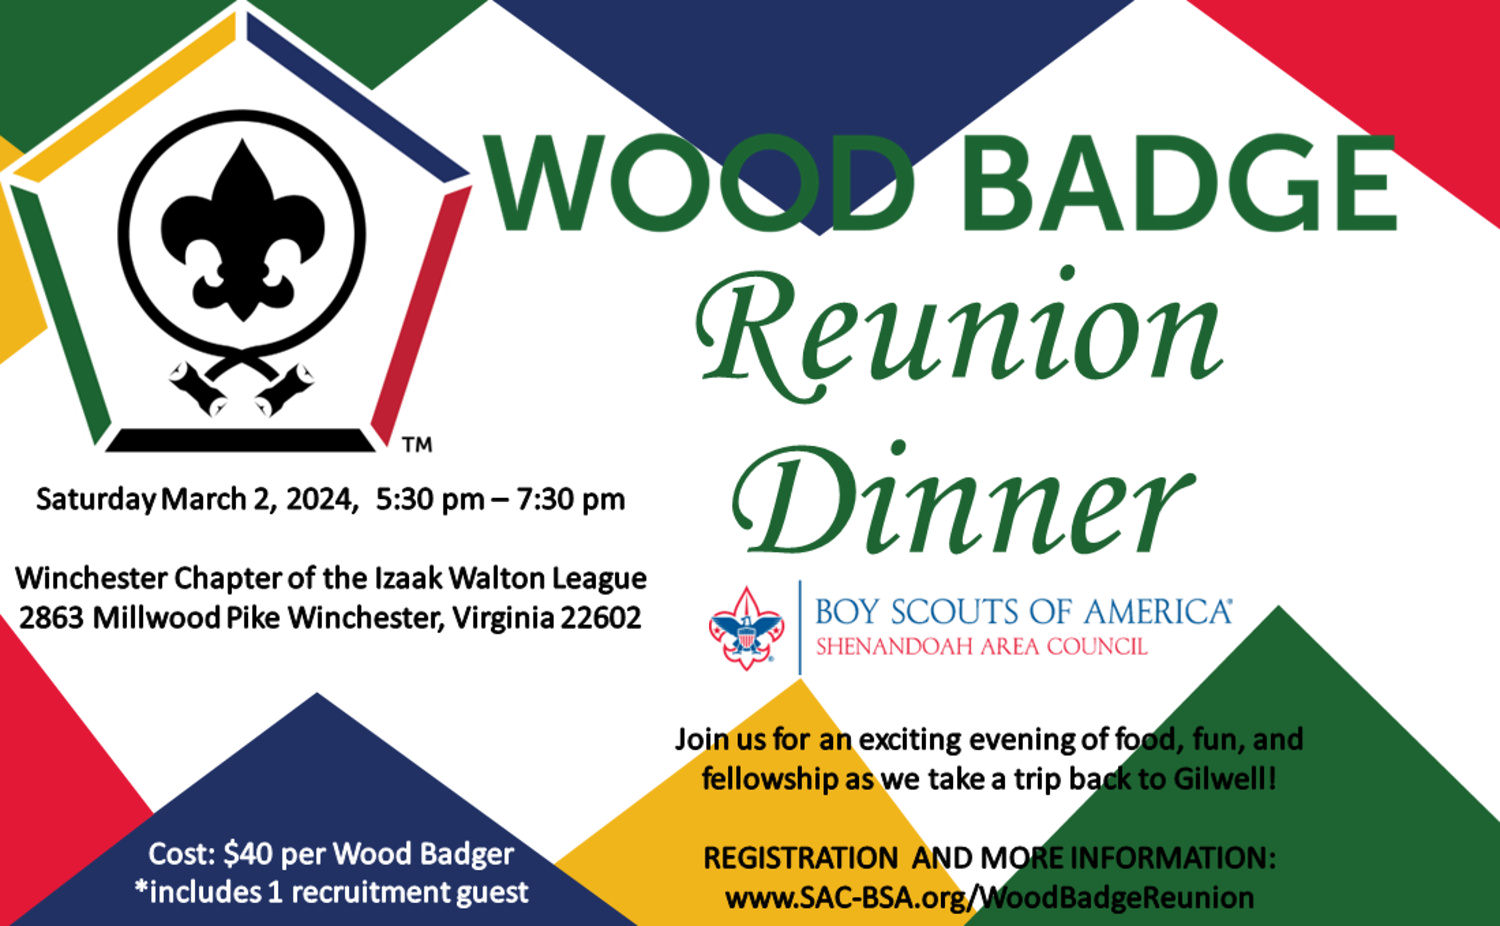 A flyer for the event WoodBadge Reunion Dinner at Winchester Chapter of the Izaak Walton League. Join us for a trip Back to Gilwell on Saturday, March 2.